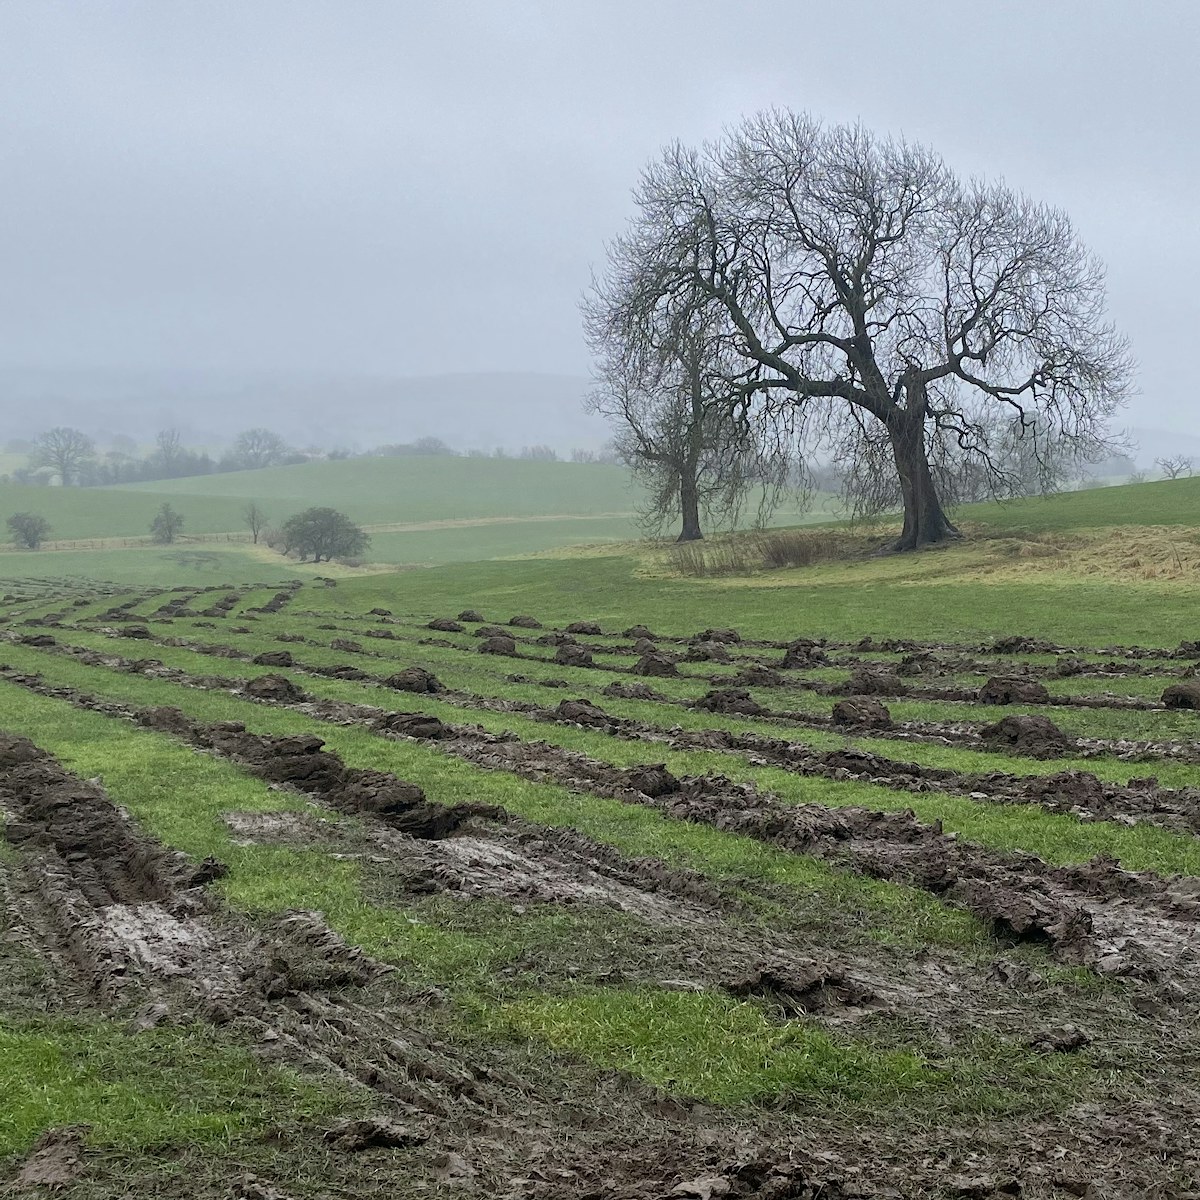 Ground preparation underway for large scale tree planting